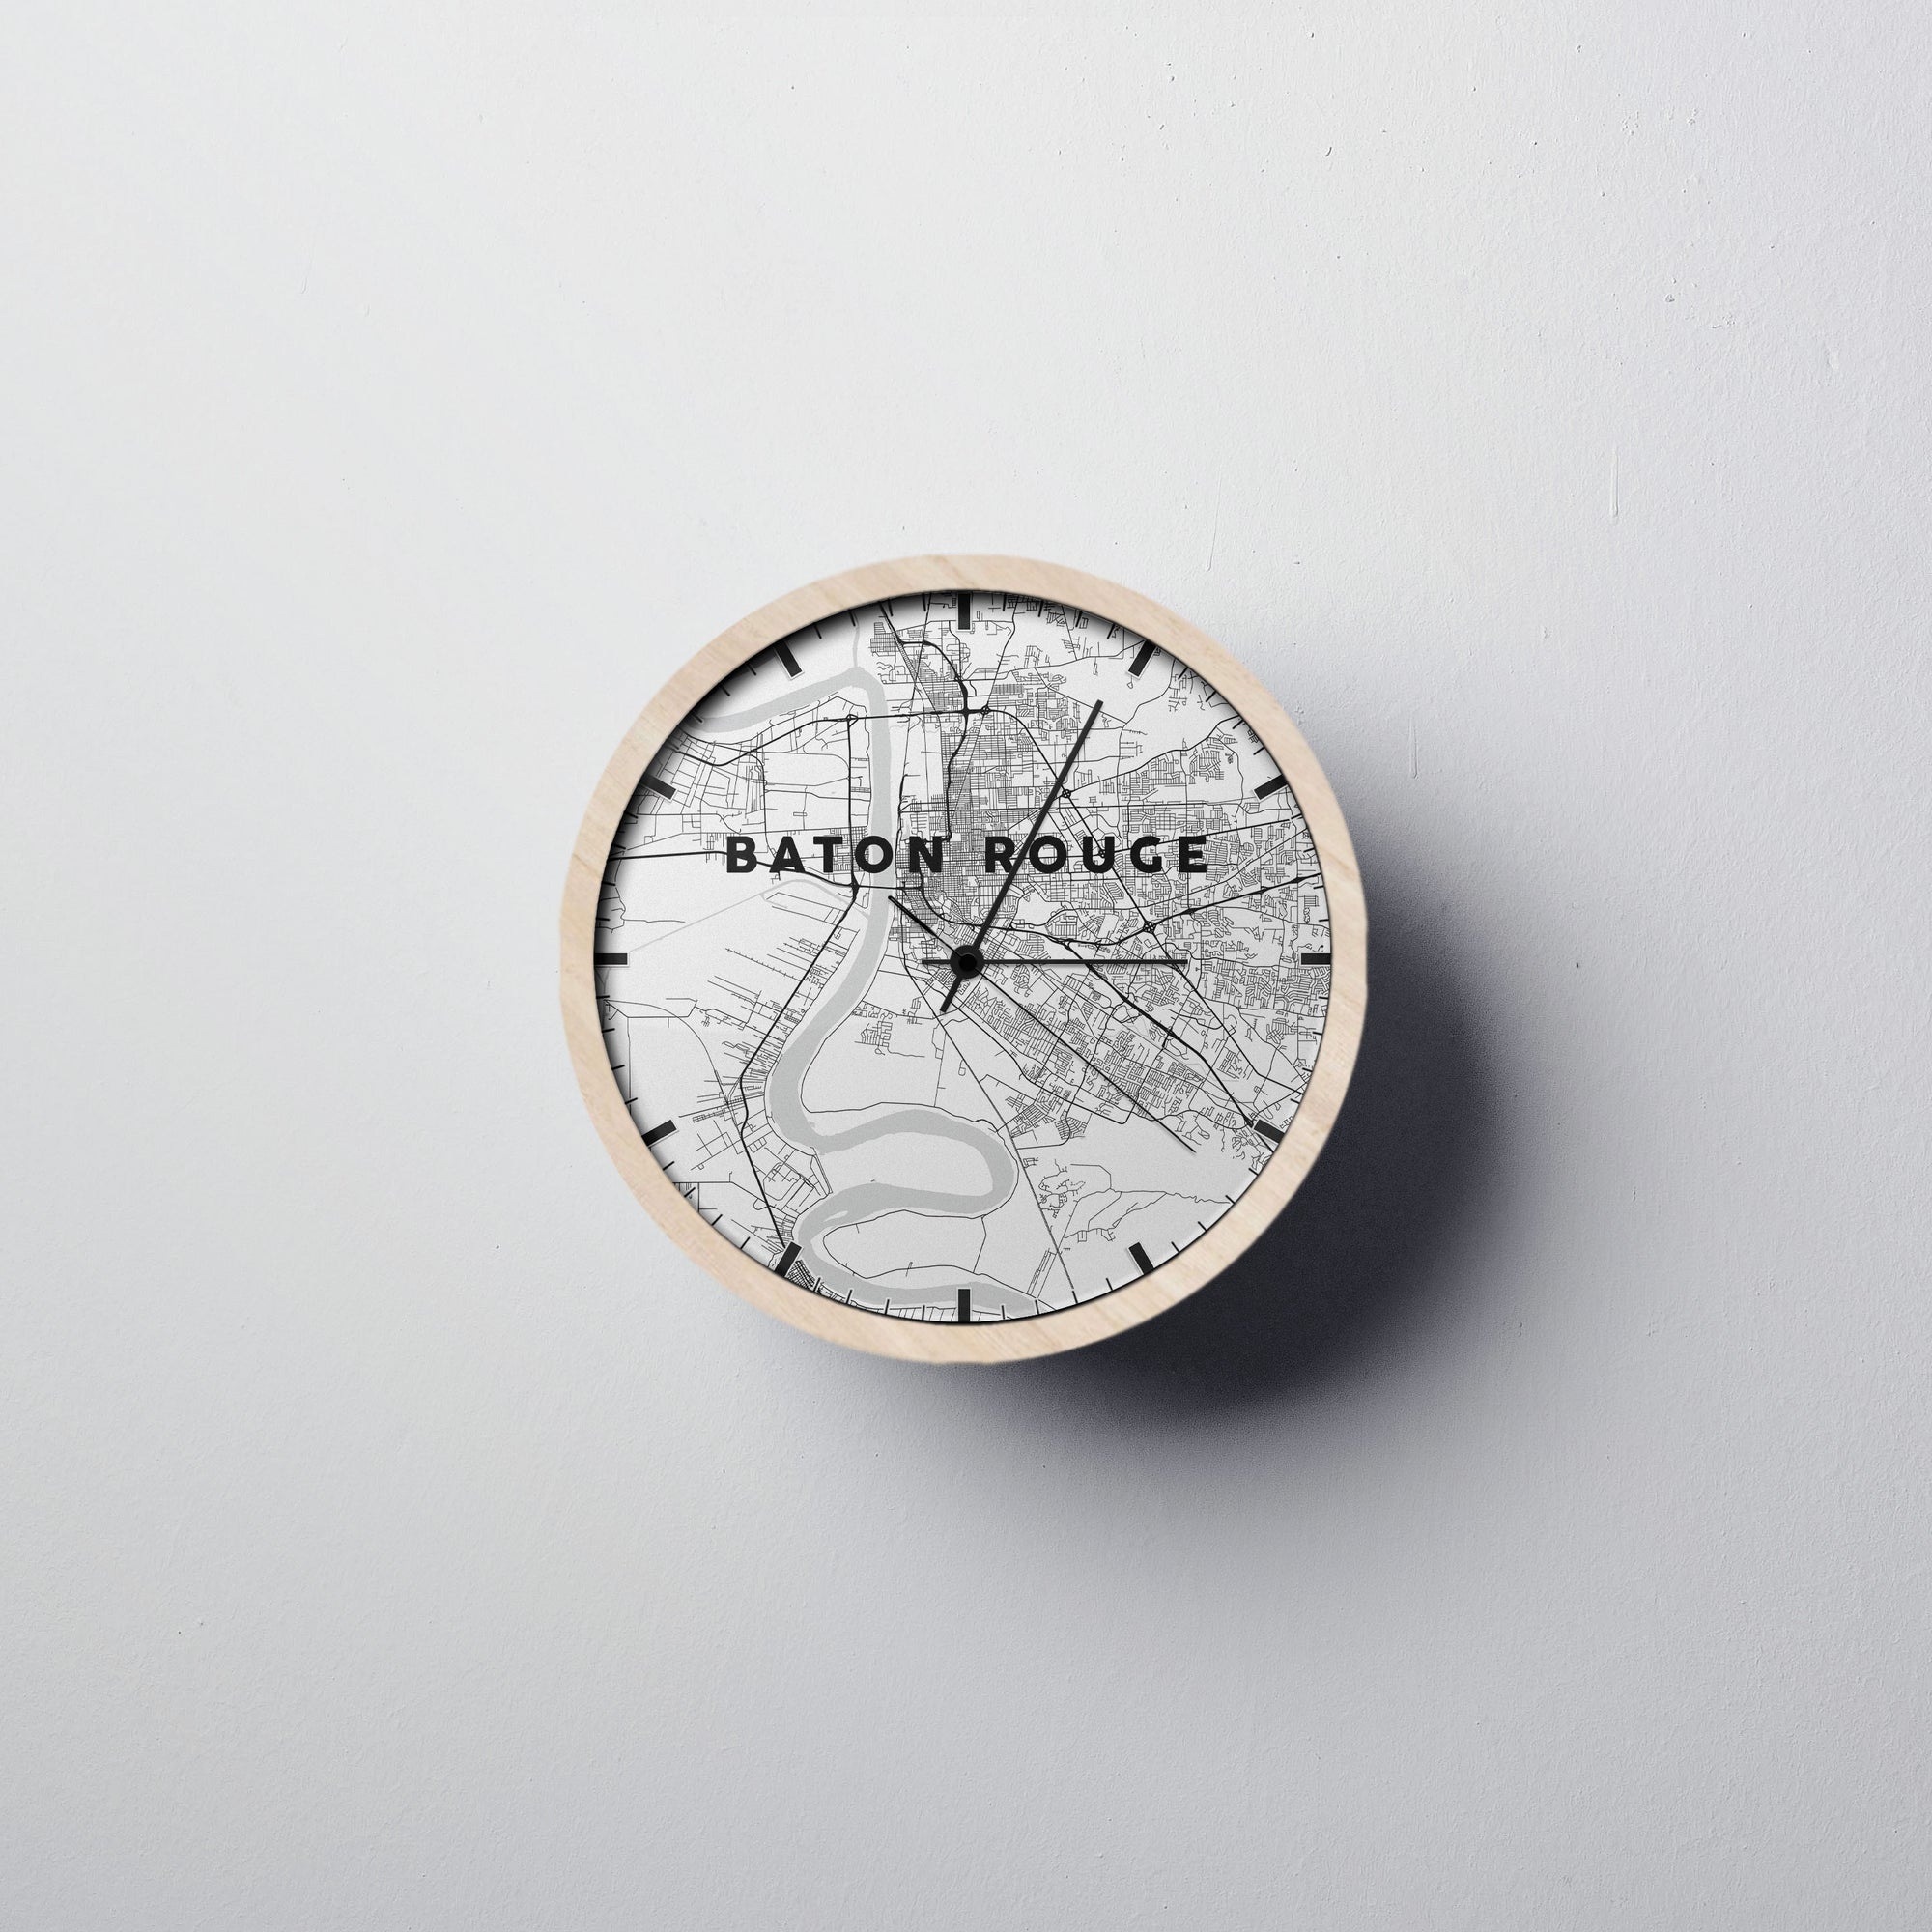 Baton-rouge Wall Clock - Point Two Design